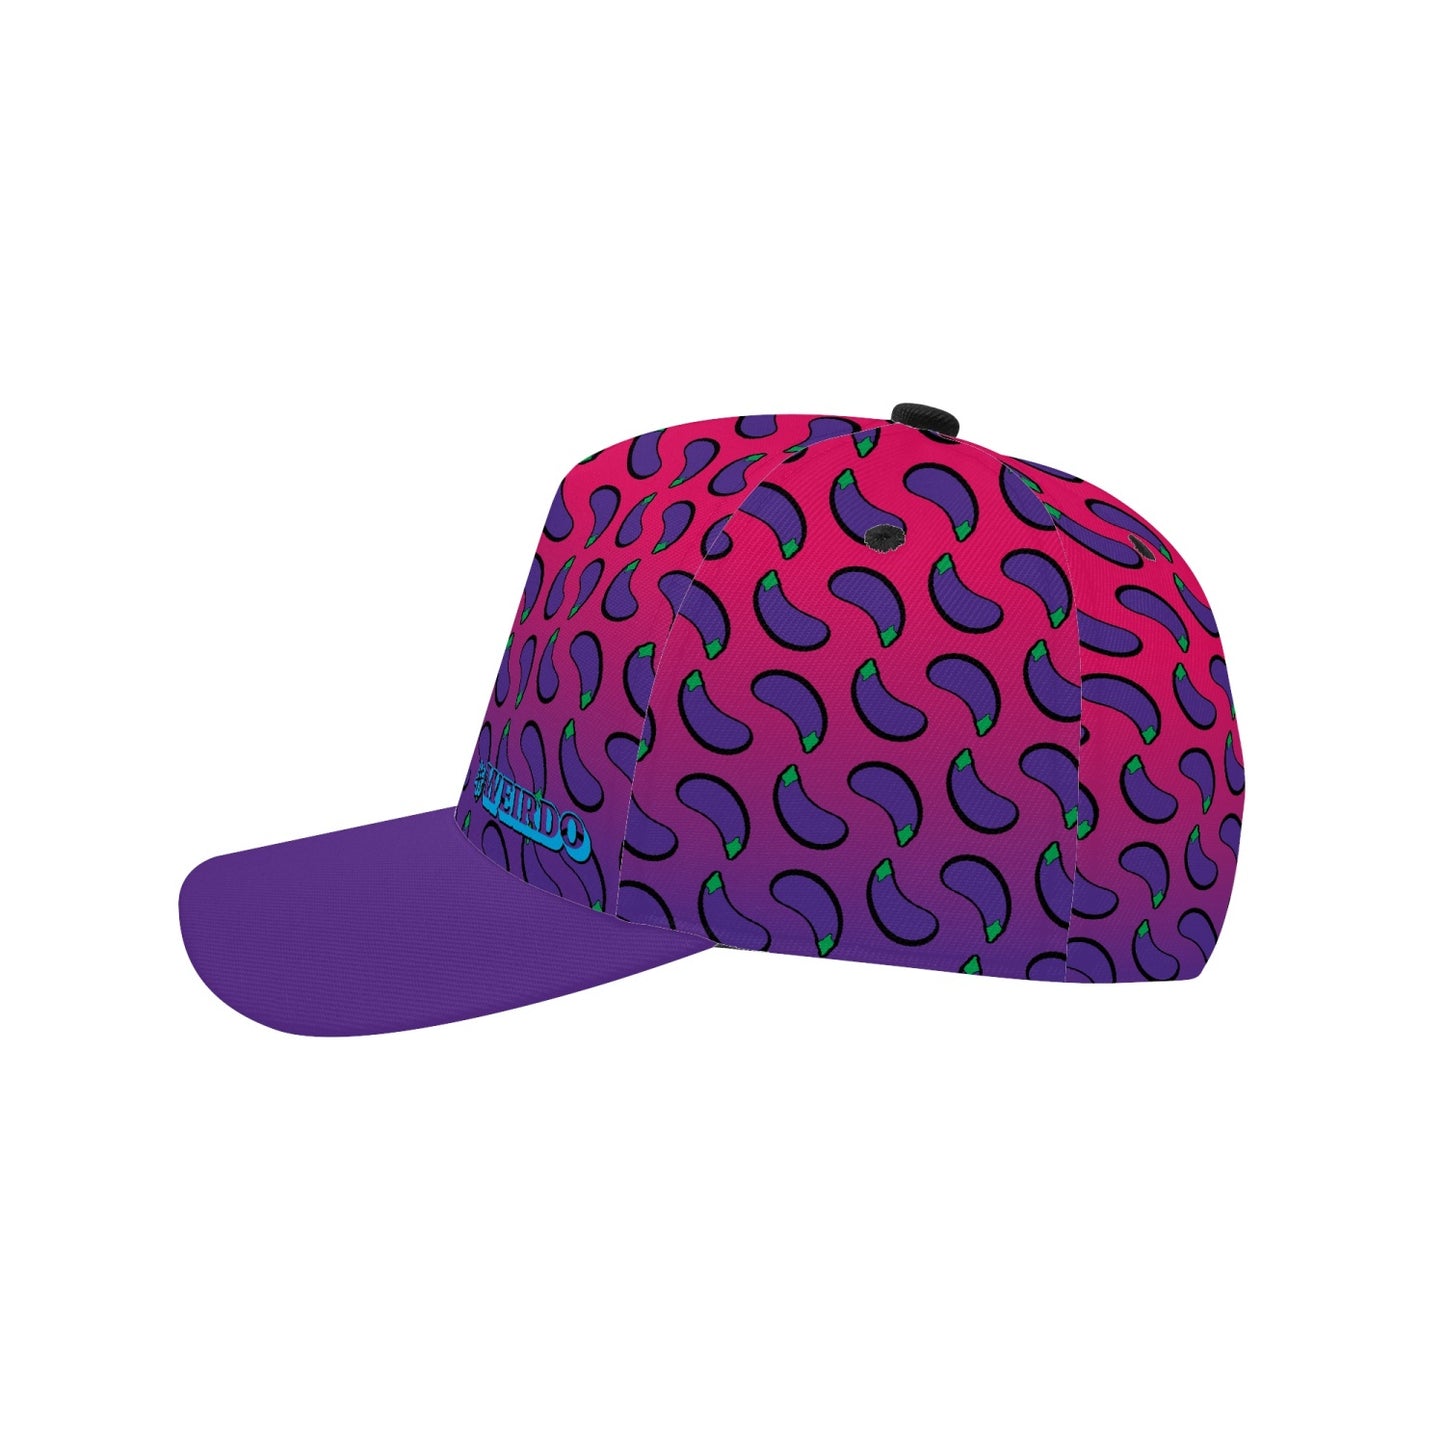 #WEIRDO | Let's weird up with this baseball cap! Eggplants all over printed with our logo printed at the front.